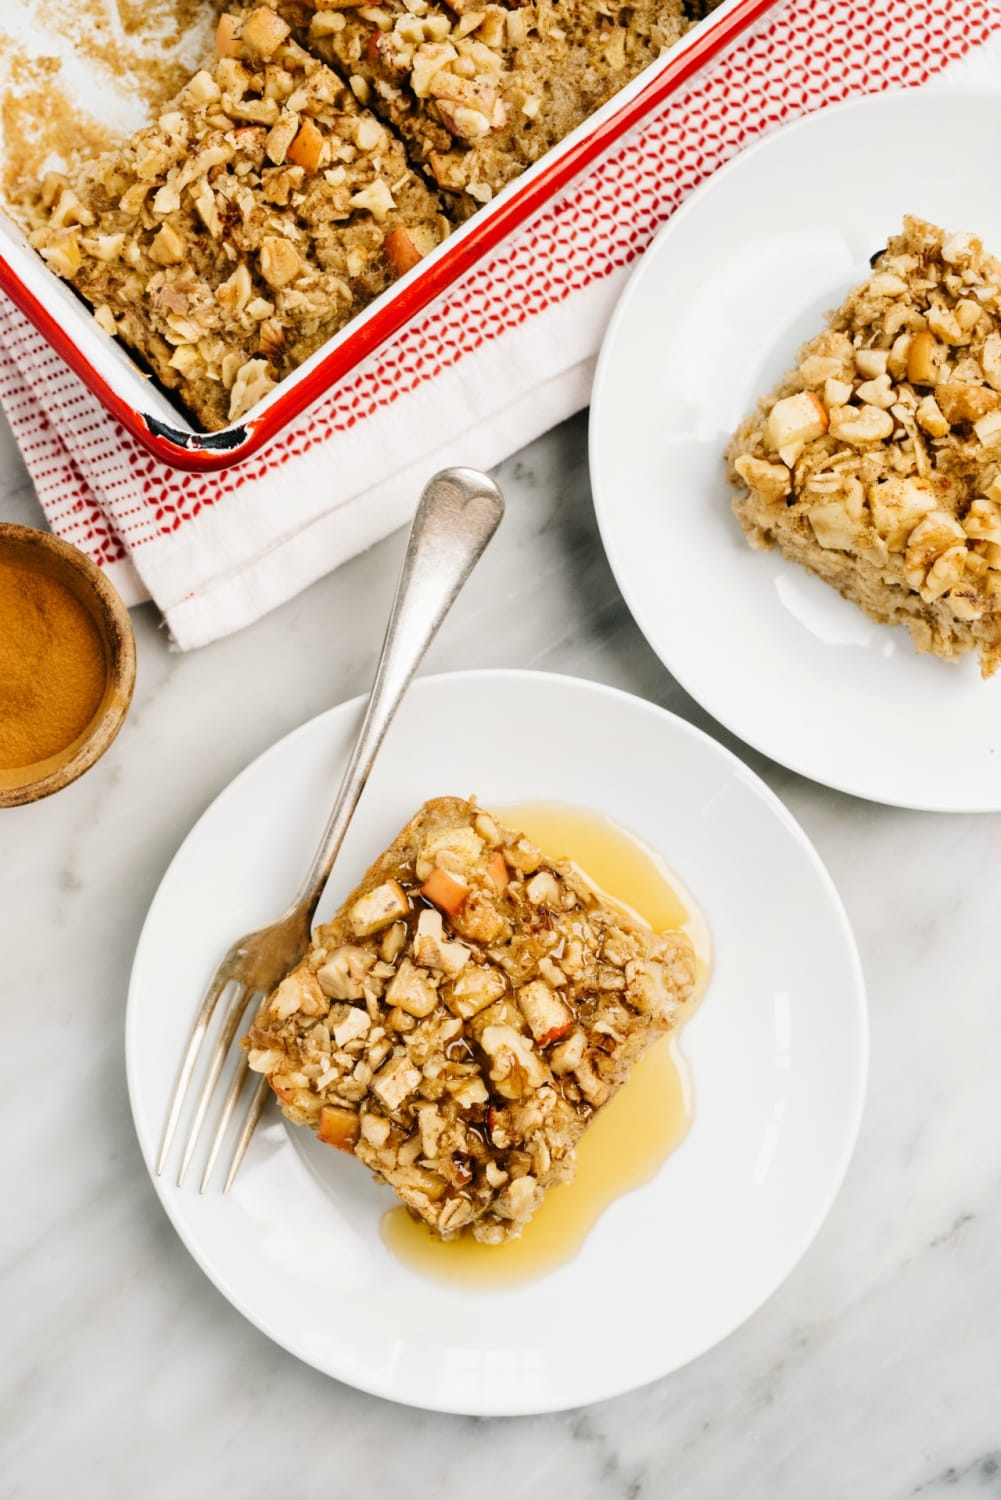 This apple baked oatmeal is a warm, filling, wholesome breakfast.